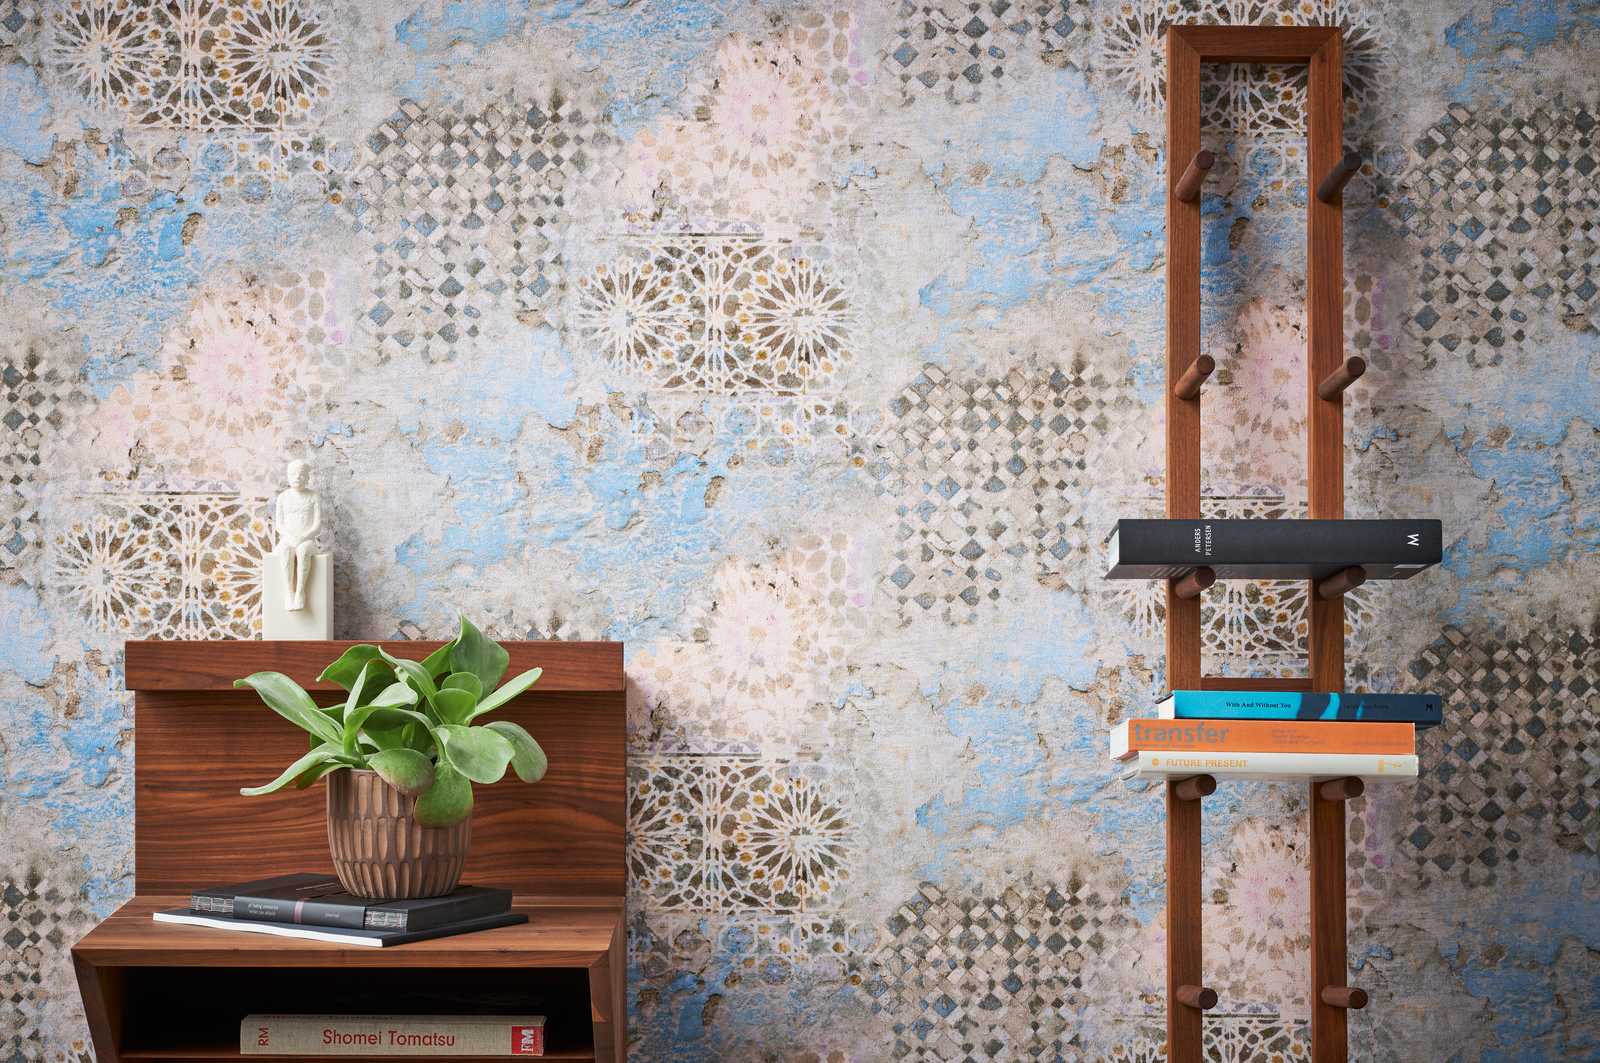             Colorful mosaic wallpaper with rustic wall look - beige, blue, brown
        